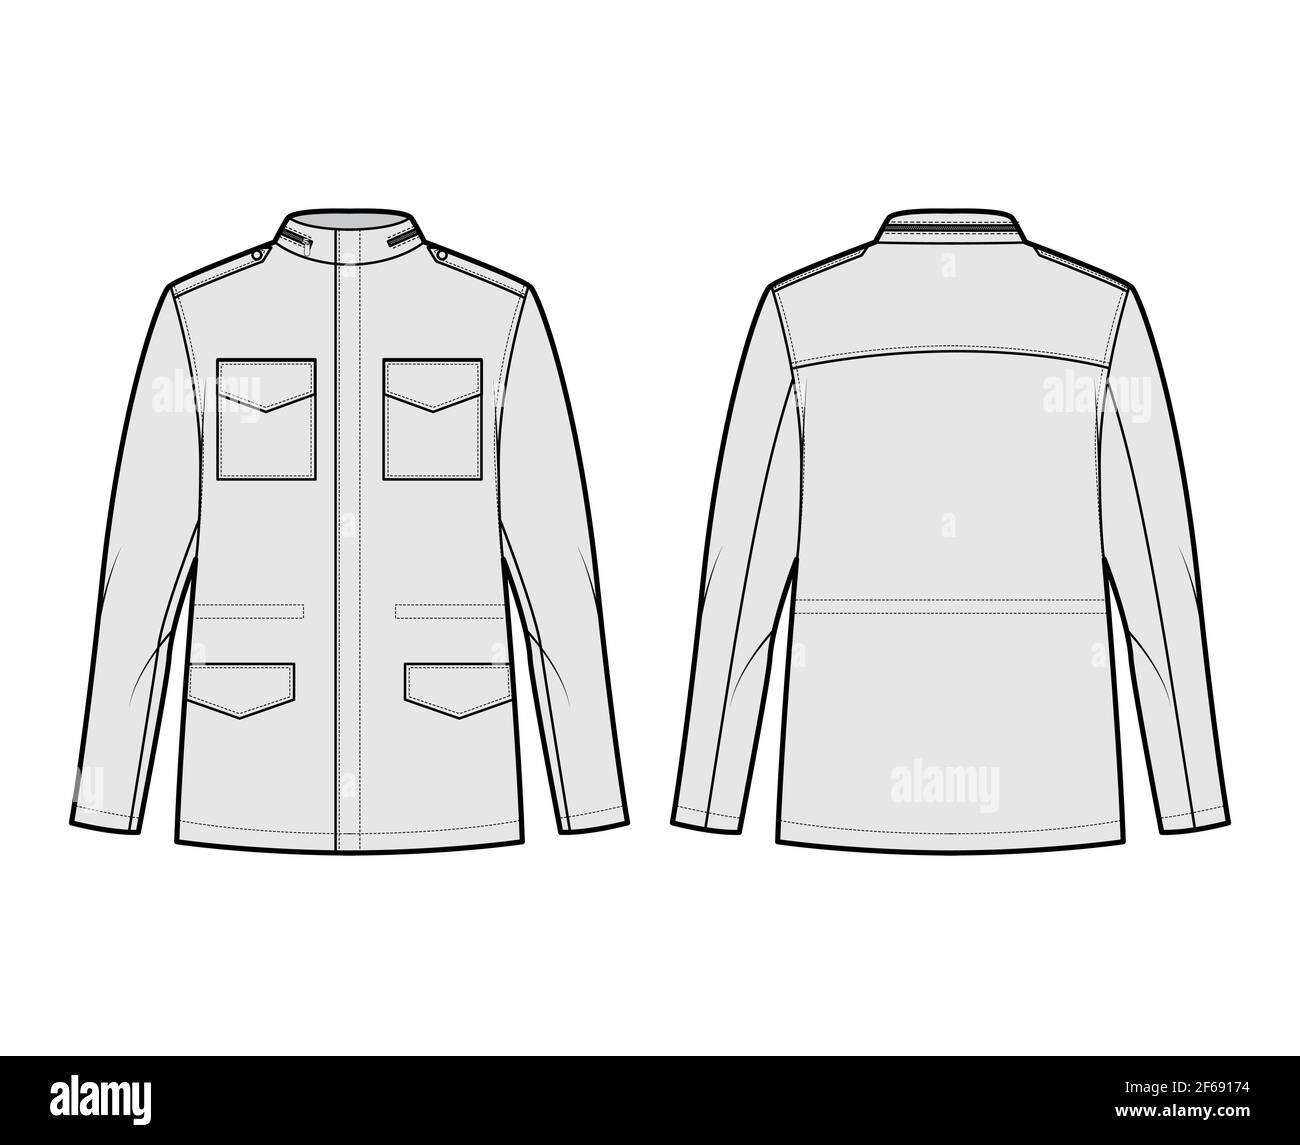 M-65 field jacket technical fashion illustration with oversized, stand collar, hide hood, flap pockets, epaulettes. Flat coat template front, back, grey color style. Women men unisex top CAD mockup Stock Vector